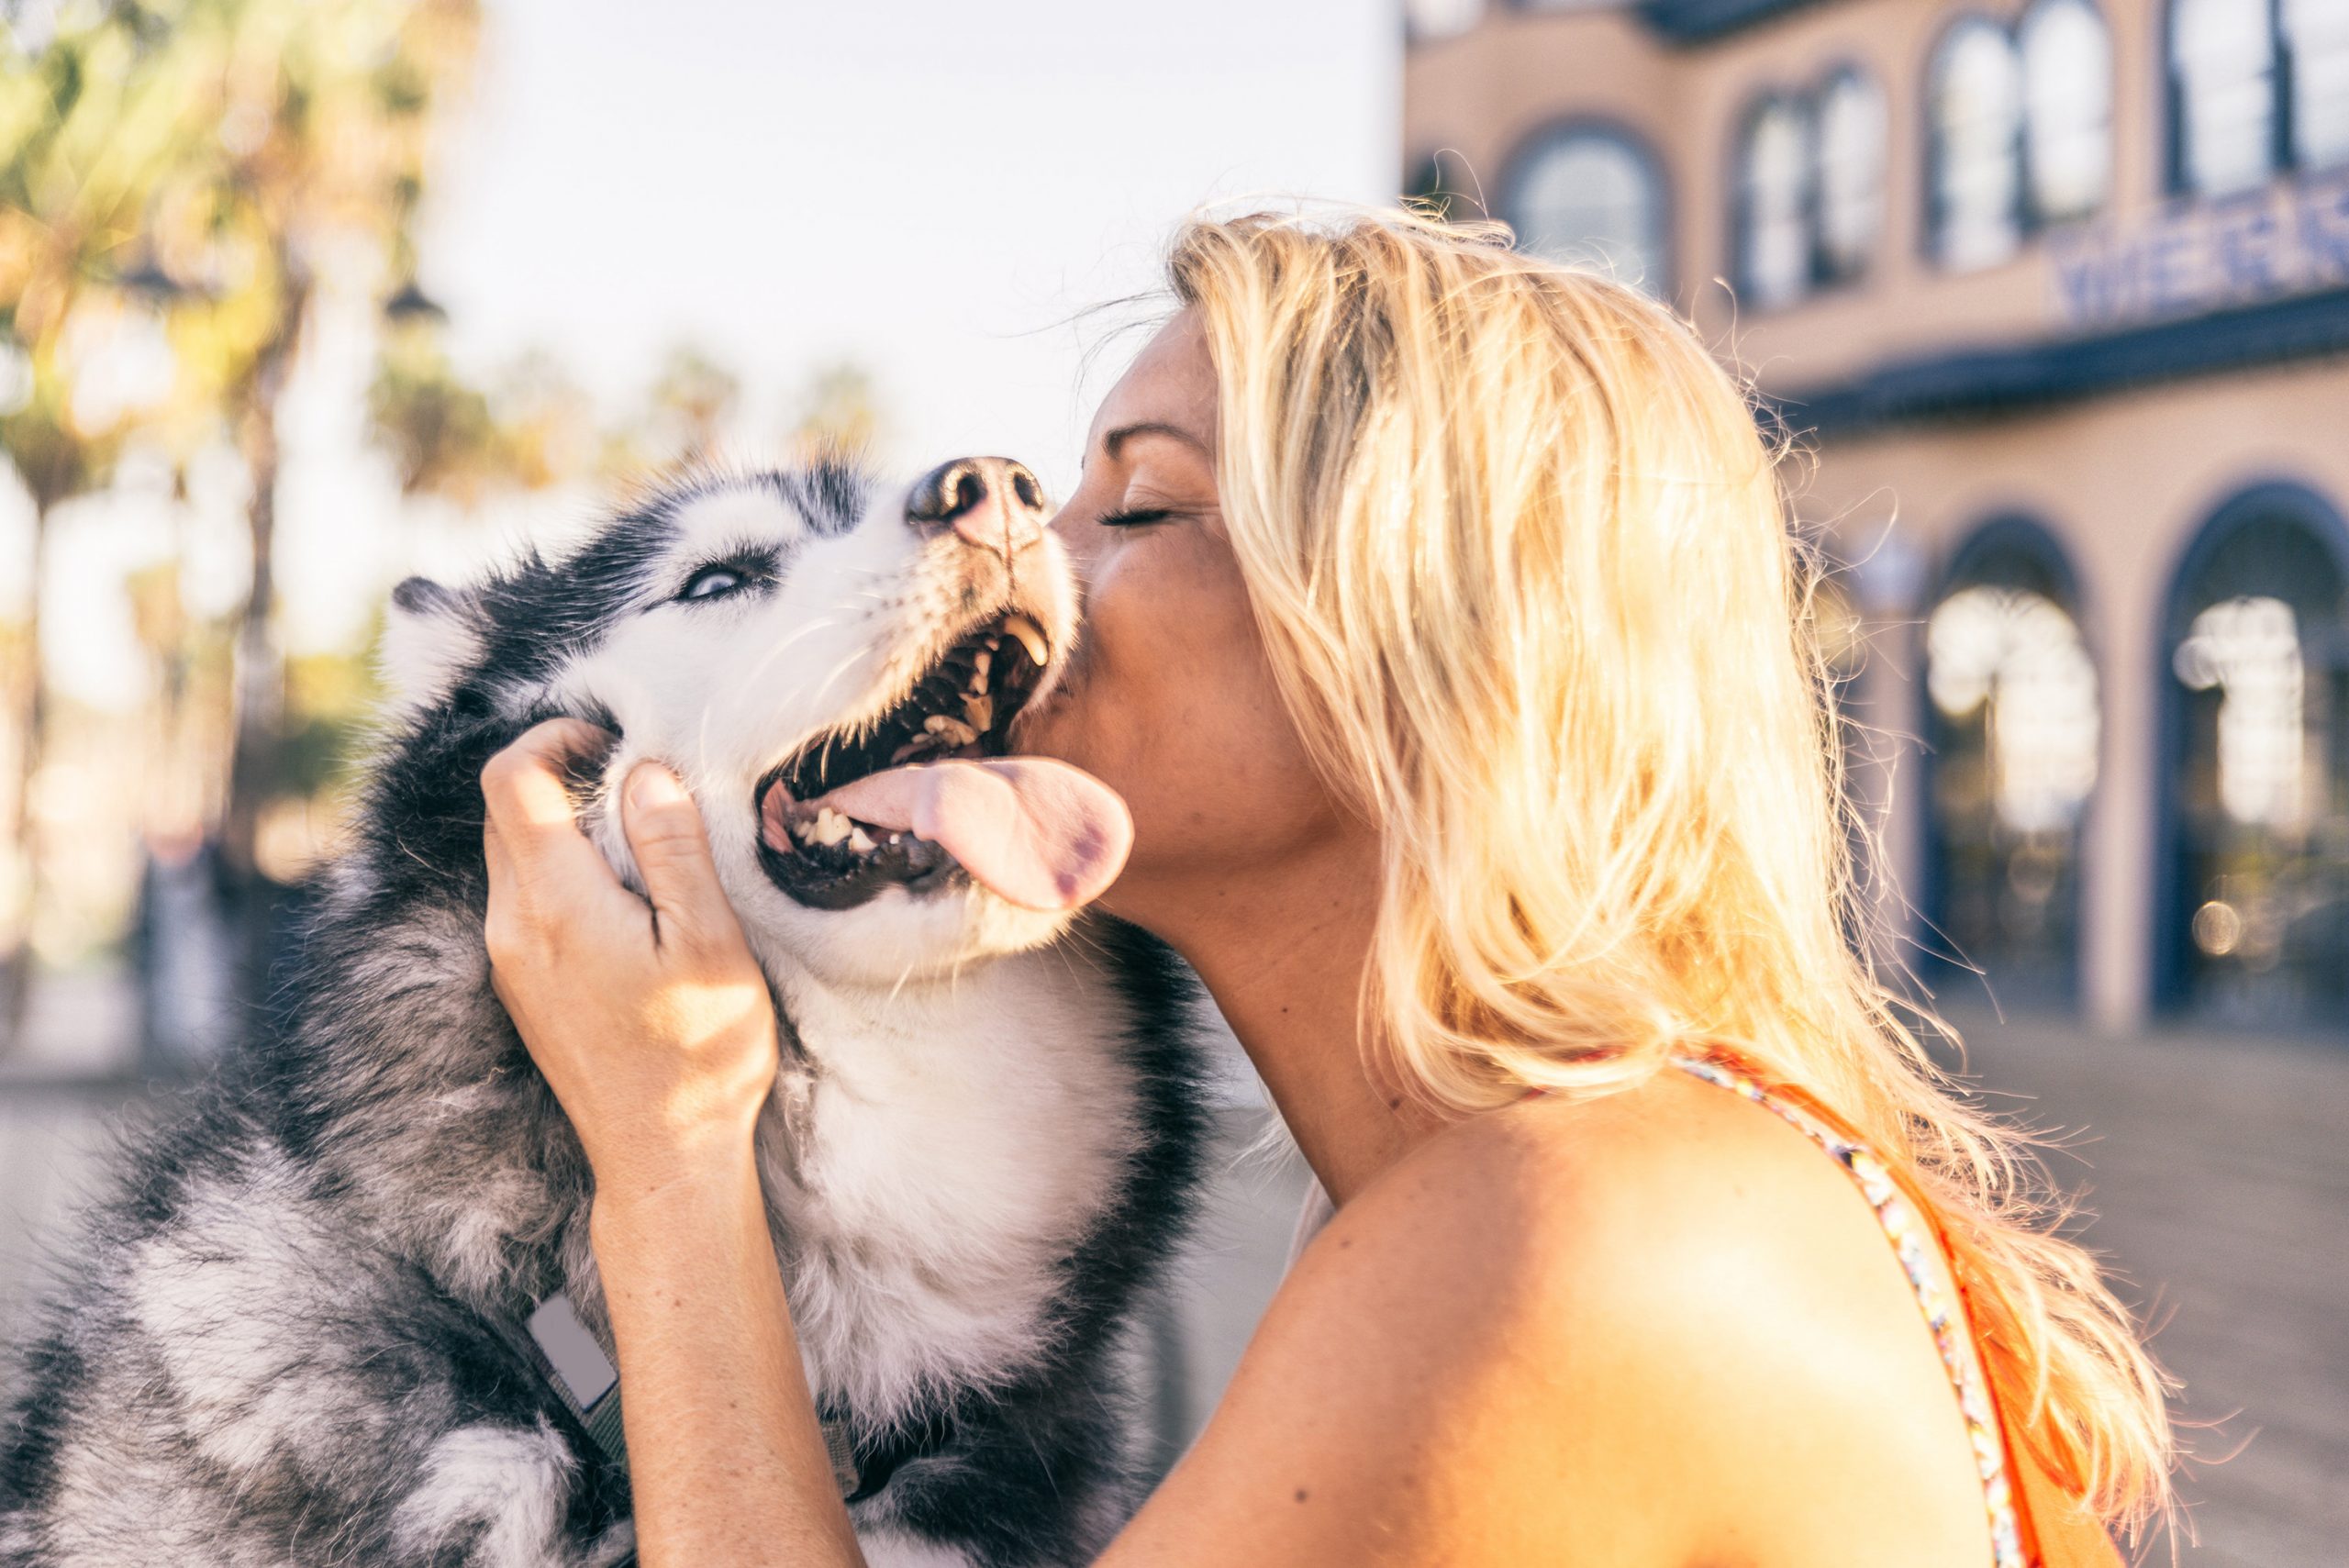 How our pets heal us lady kissing dog image